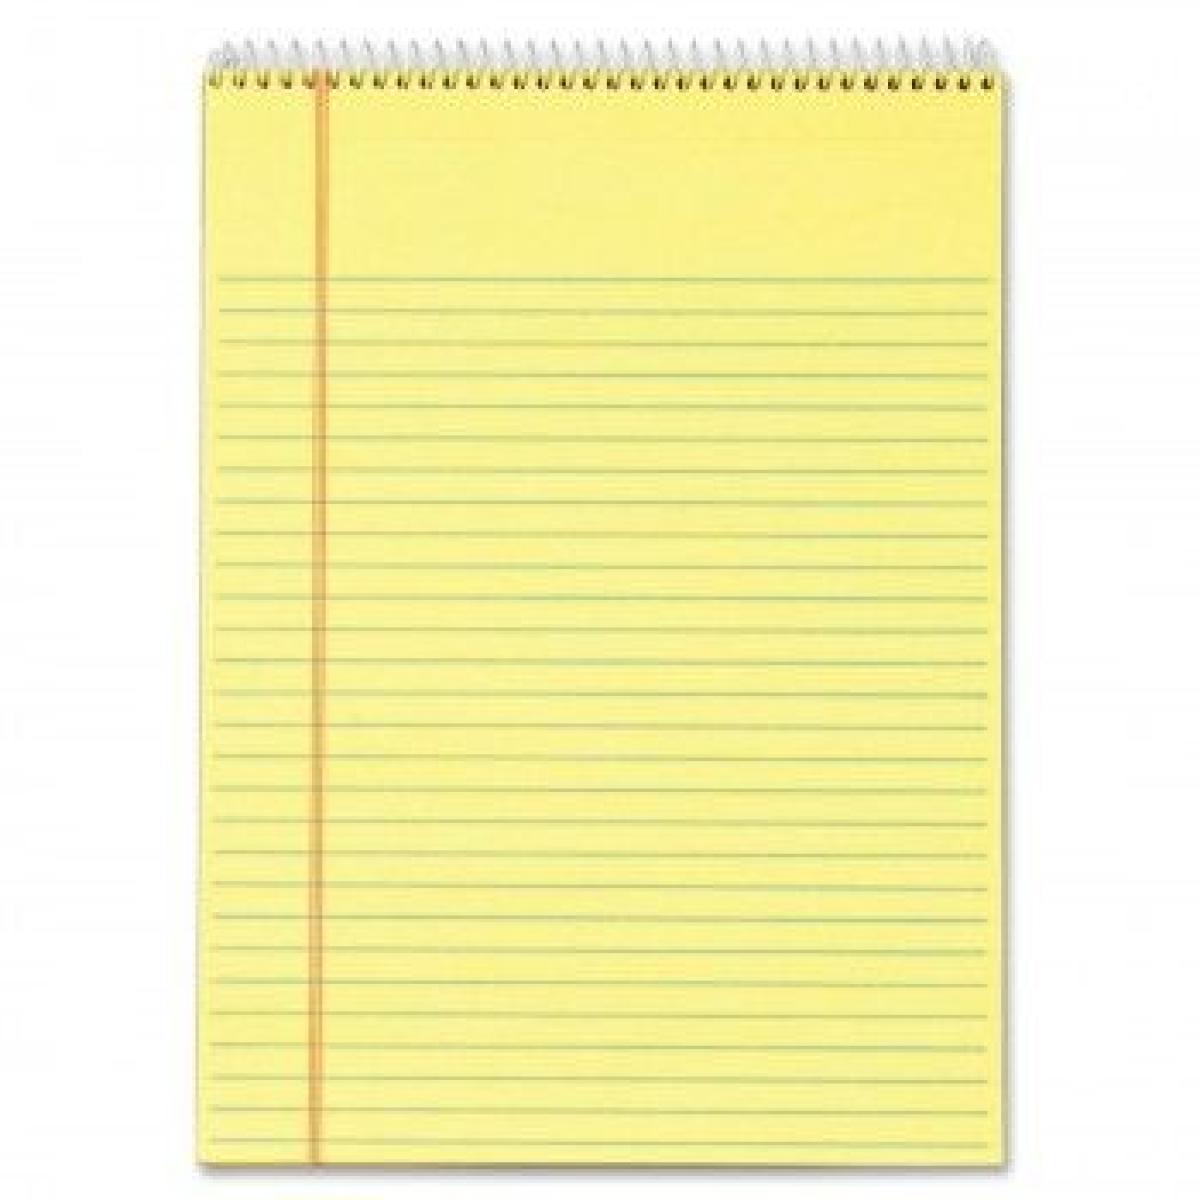 Oxford Wirebound A4 Yellow 120 Sheets